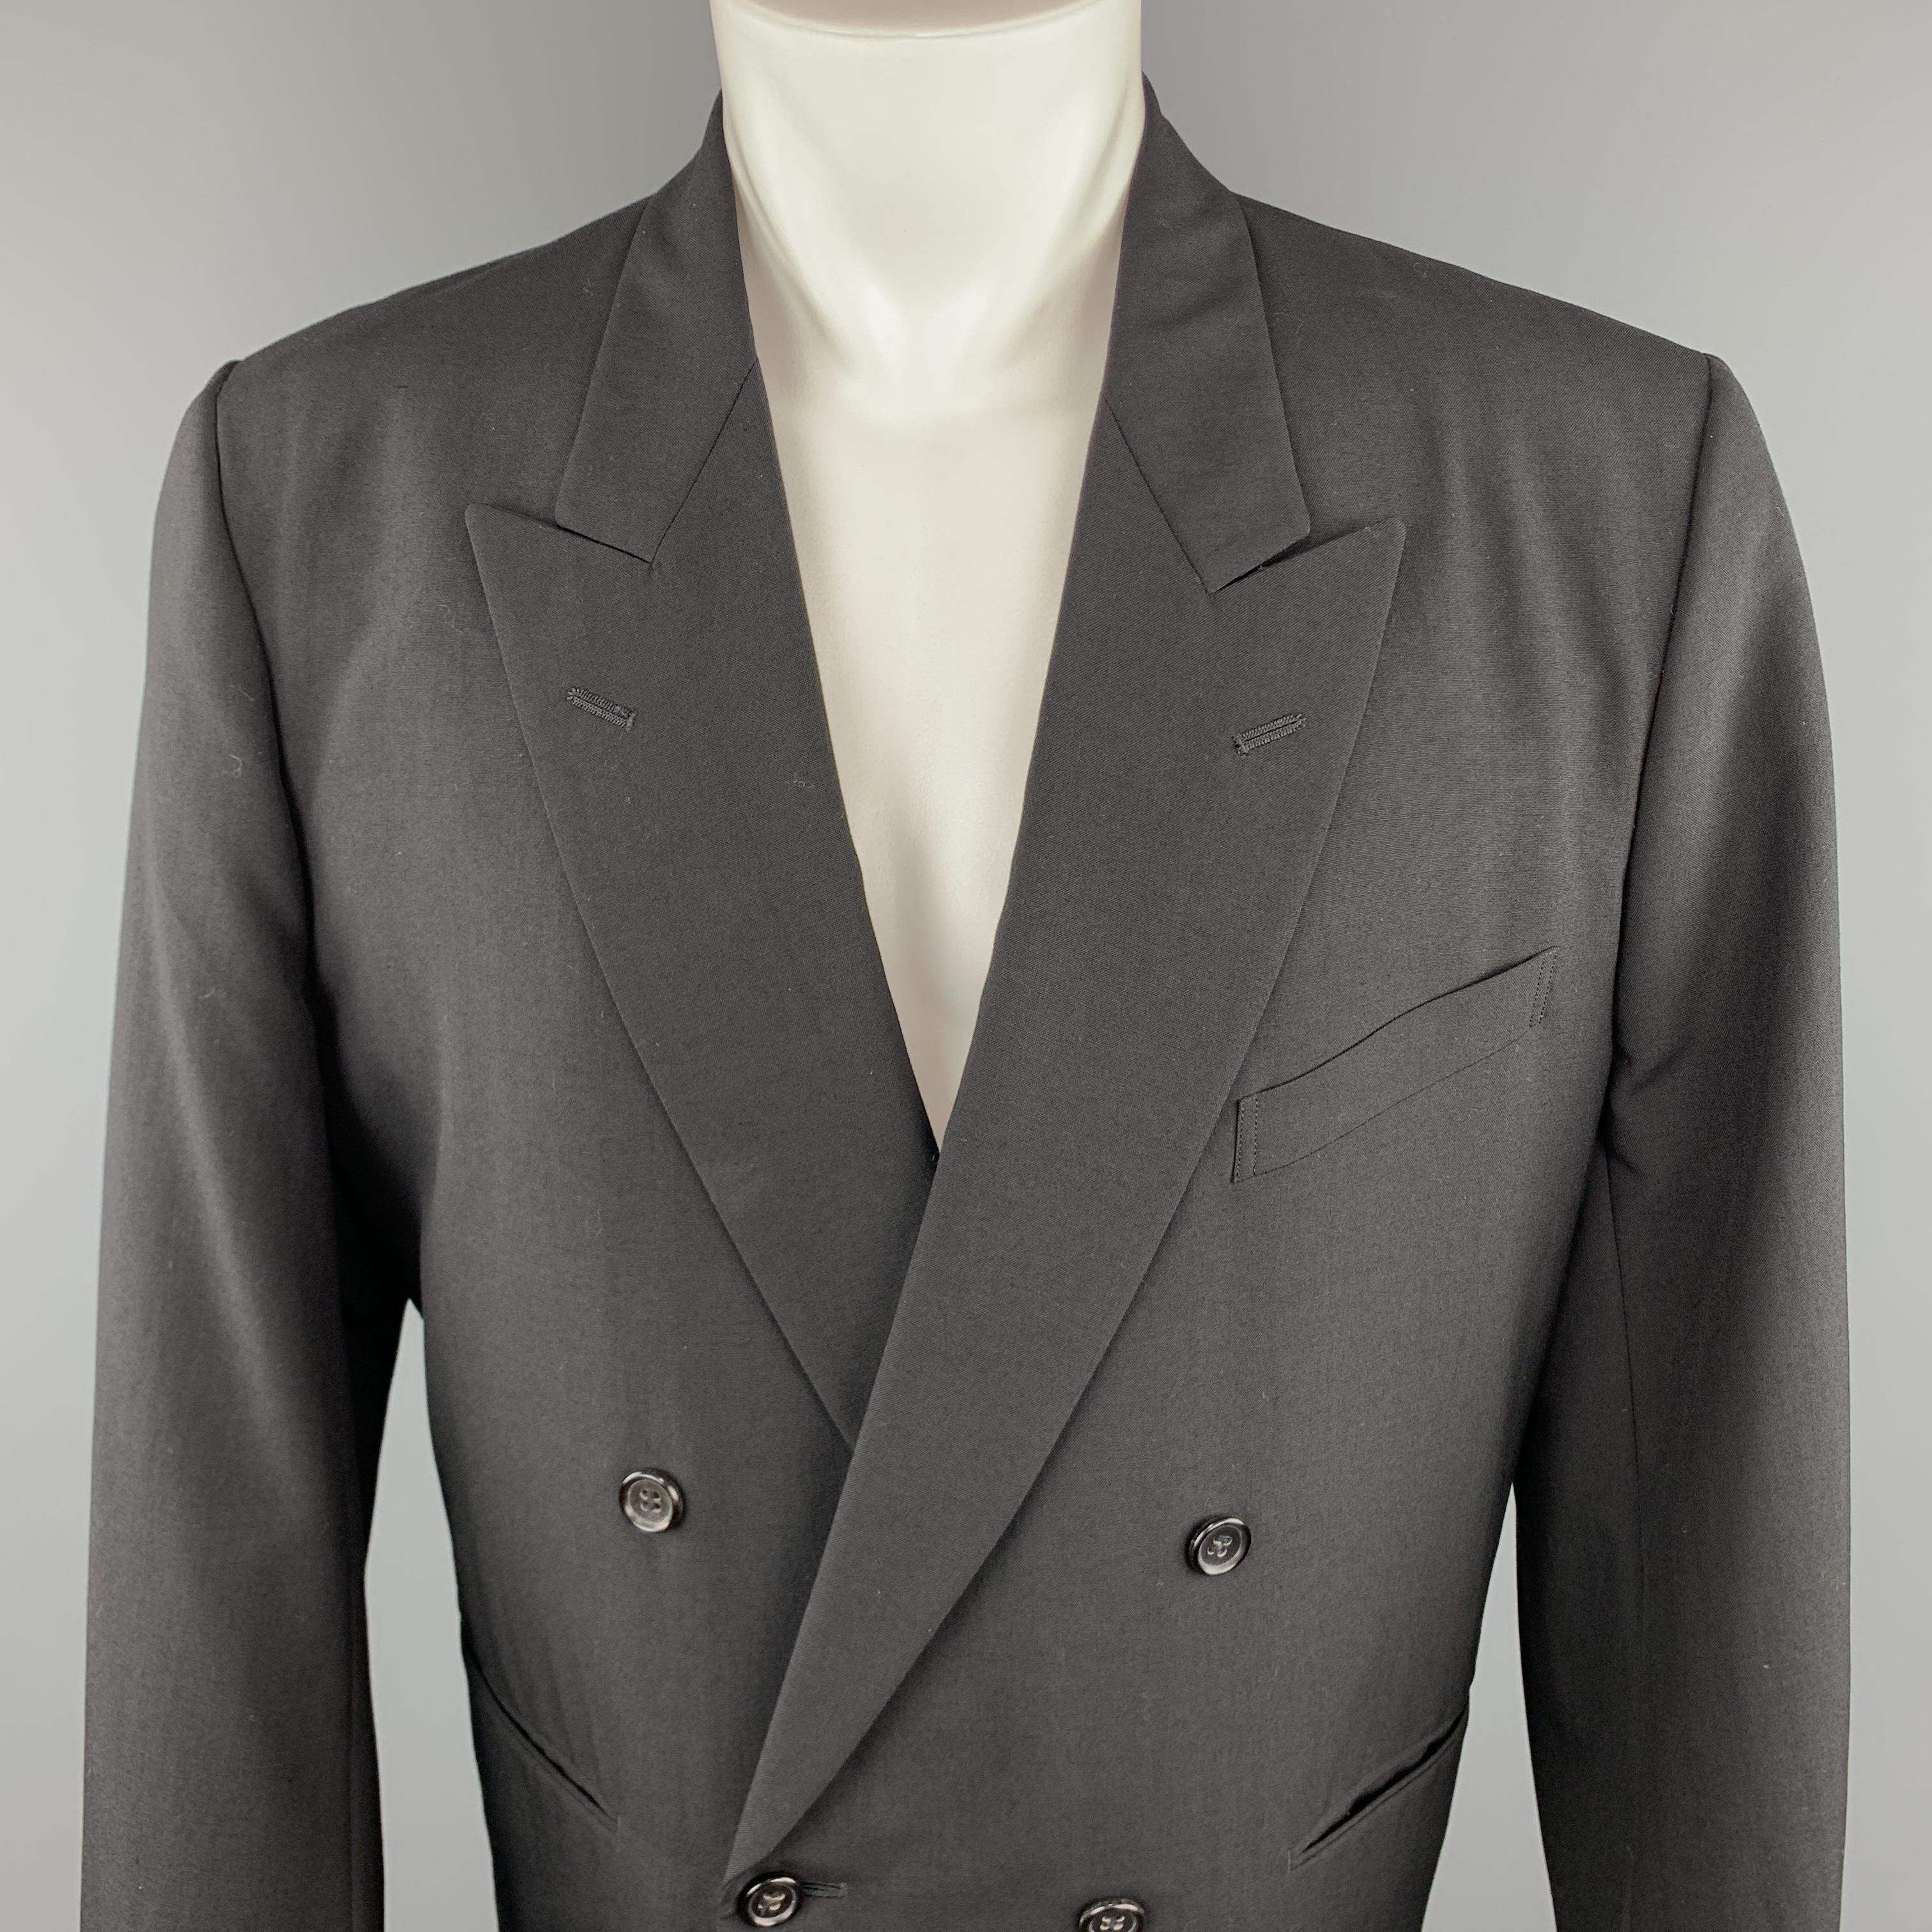 COMME des GARCONS HOMME PLUS Sport Coat comes in a black tone in a solid wool material, with a peak lapel, slit pockets, double breasted, buttoned cuffs, unlined.
 
Excellent Pre-Owned Condition.
Marked: S
 
Measurements:
 
Shoulder: 17 in.
Chest: